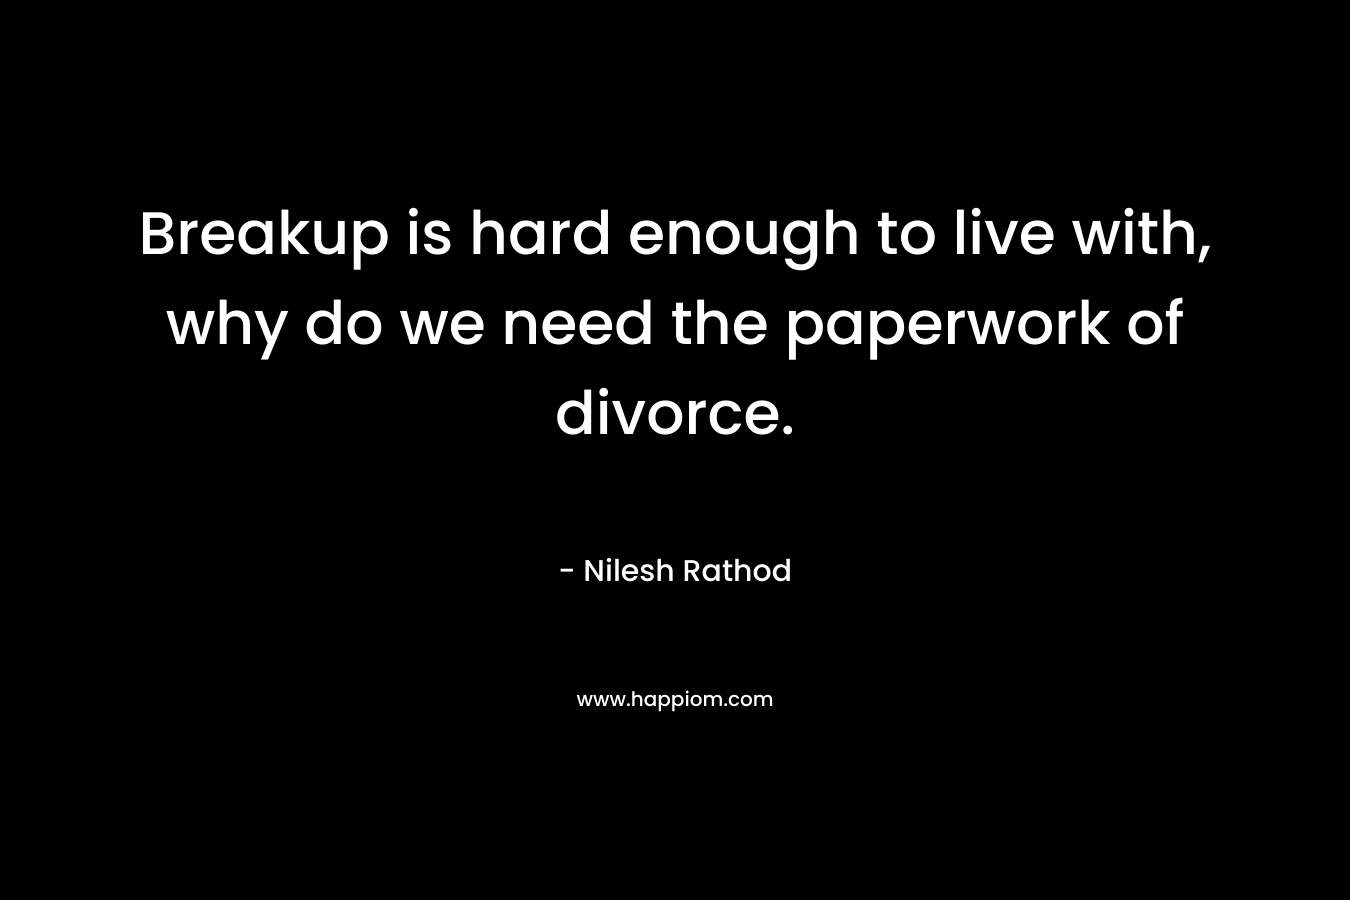 Breakup is hard enough to live with, why do we need the paperwork of divorce.